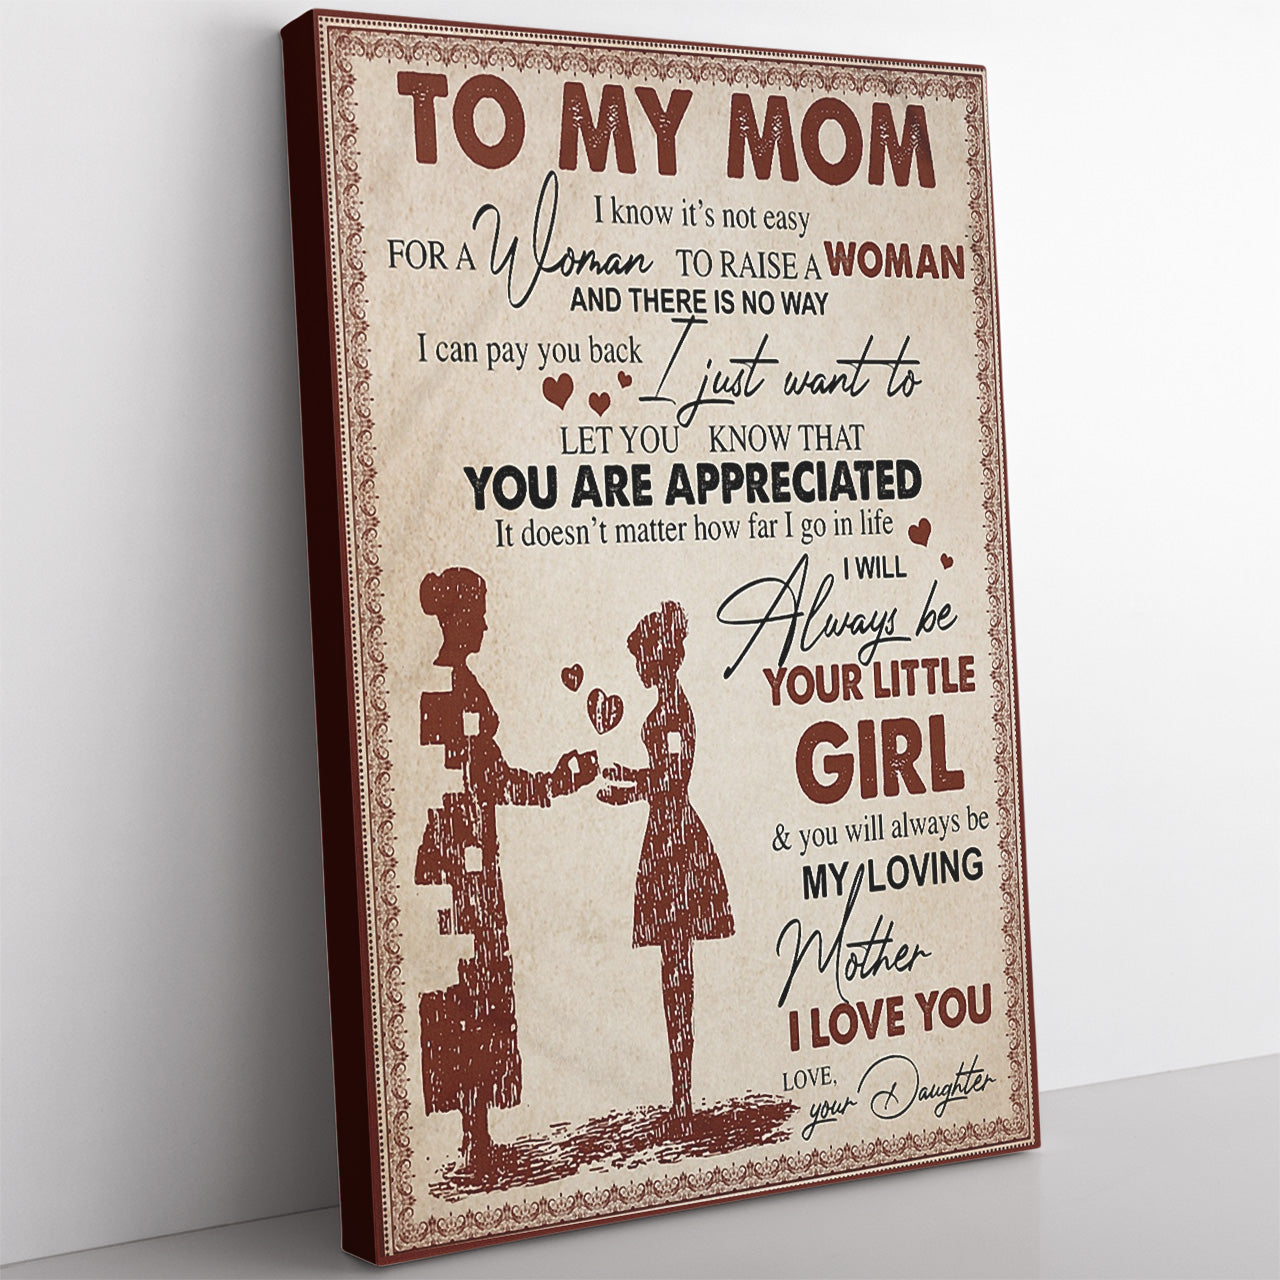 Personalized Canvas Gift For Mom, I Know it is not Easy for a Woman to raise a Woman Canvas